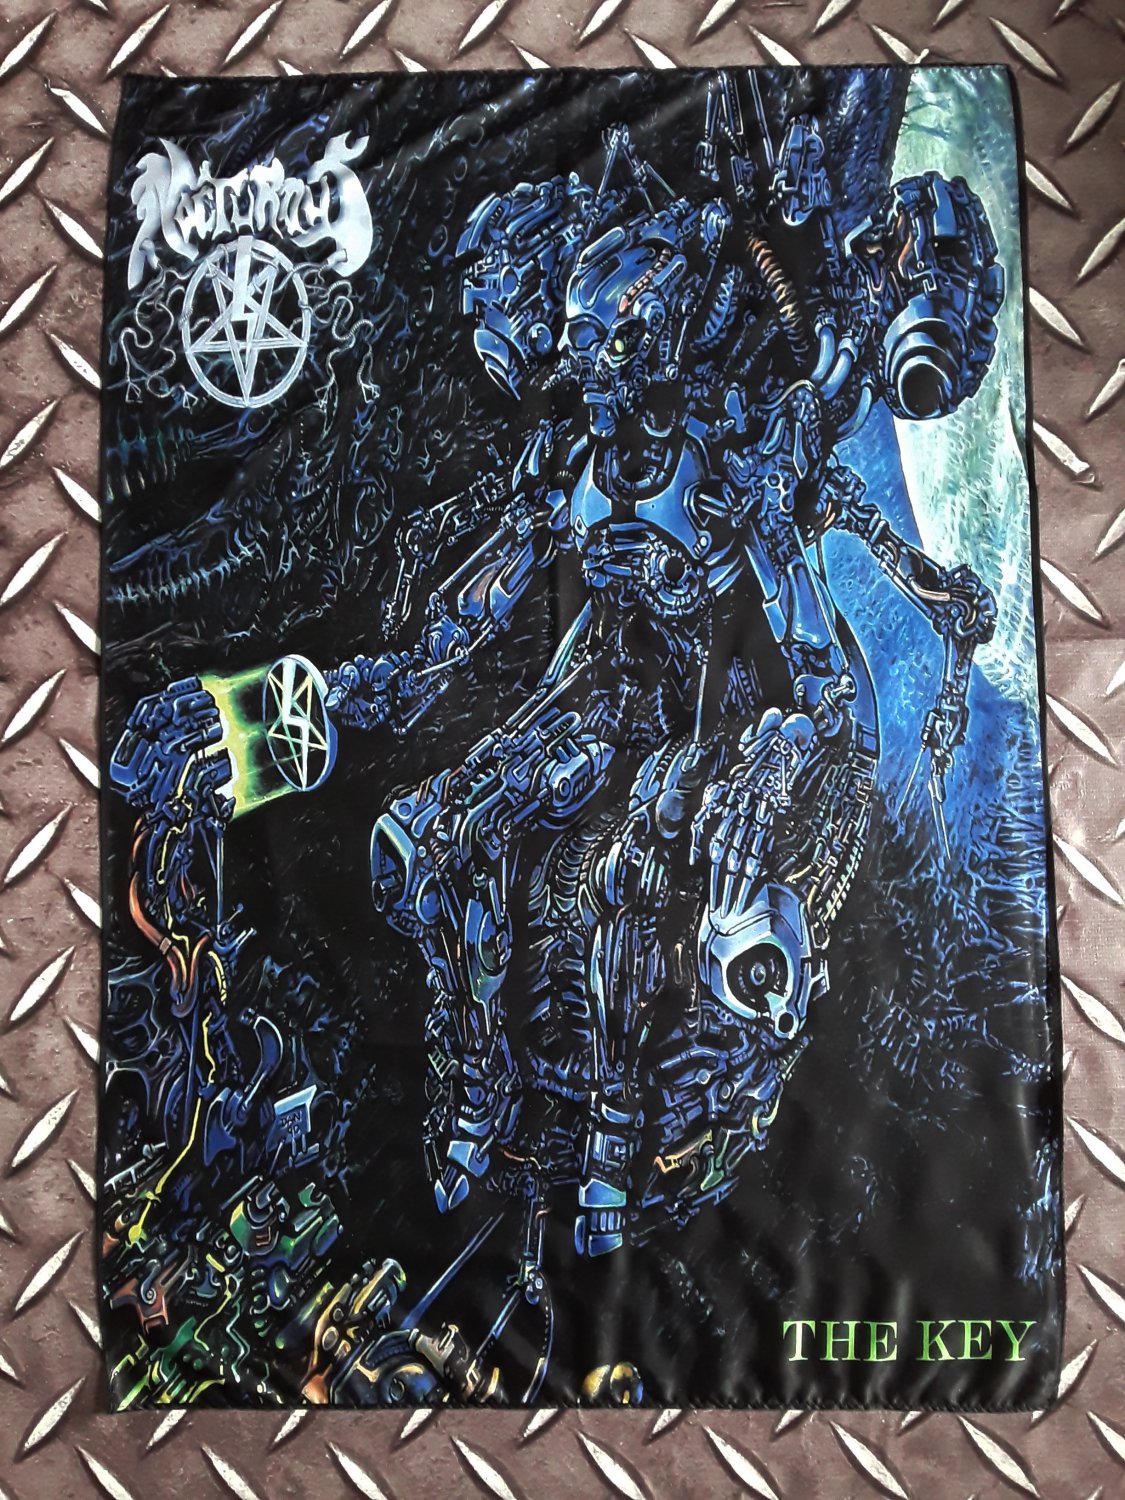 NOCTURNUS - The key POSTER FLAG Death metal cloth poster Bolt thrower